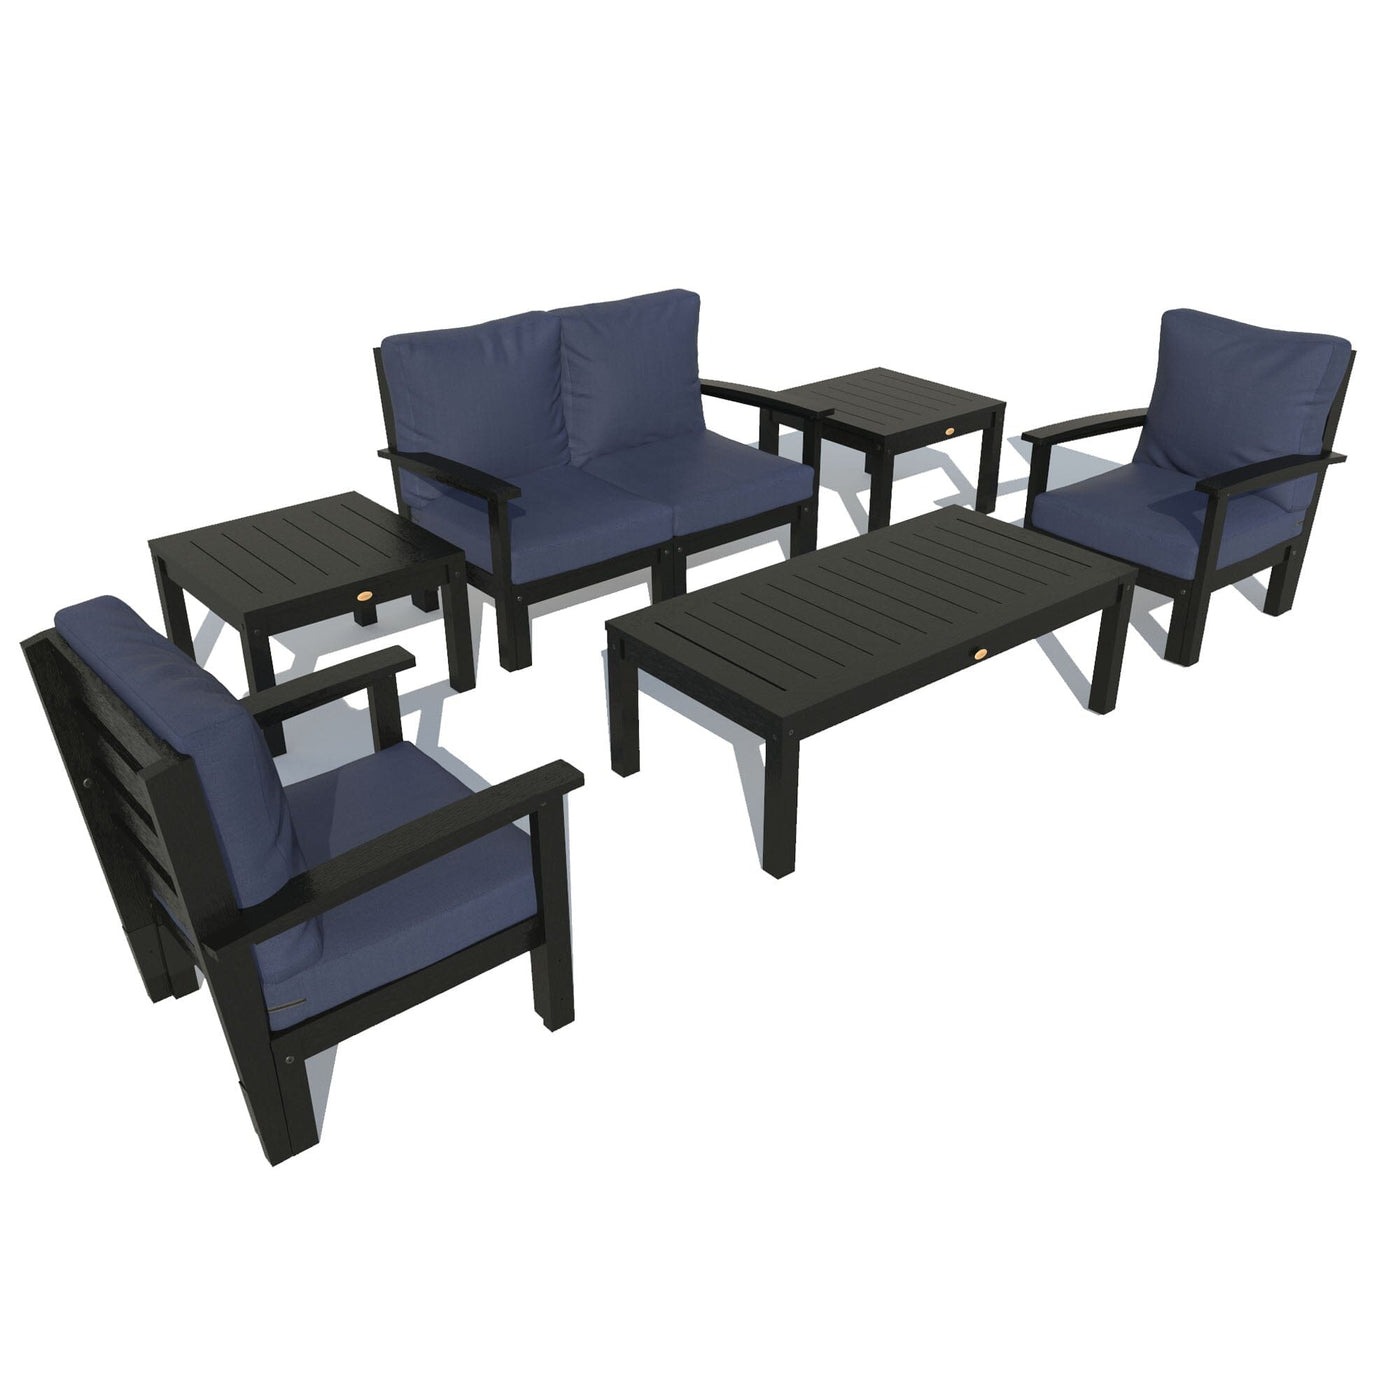 Bespoke Deep Seating: Loveseat, Set of 2 Chairs, Conversation Table, and 2 Side Tables Deep Seating Highwood USA Navy Black 